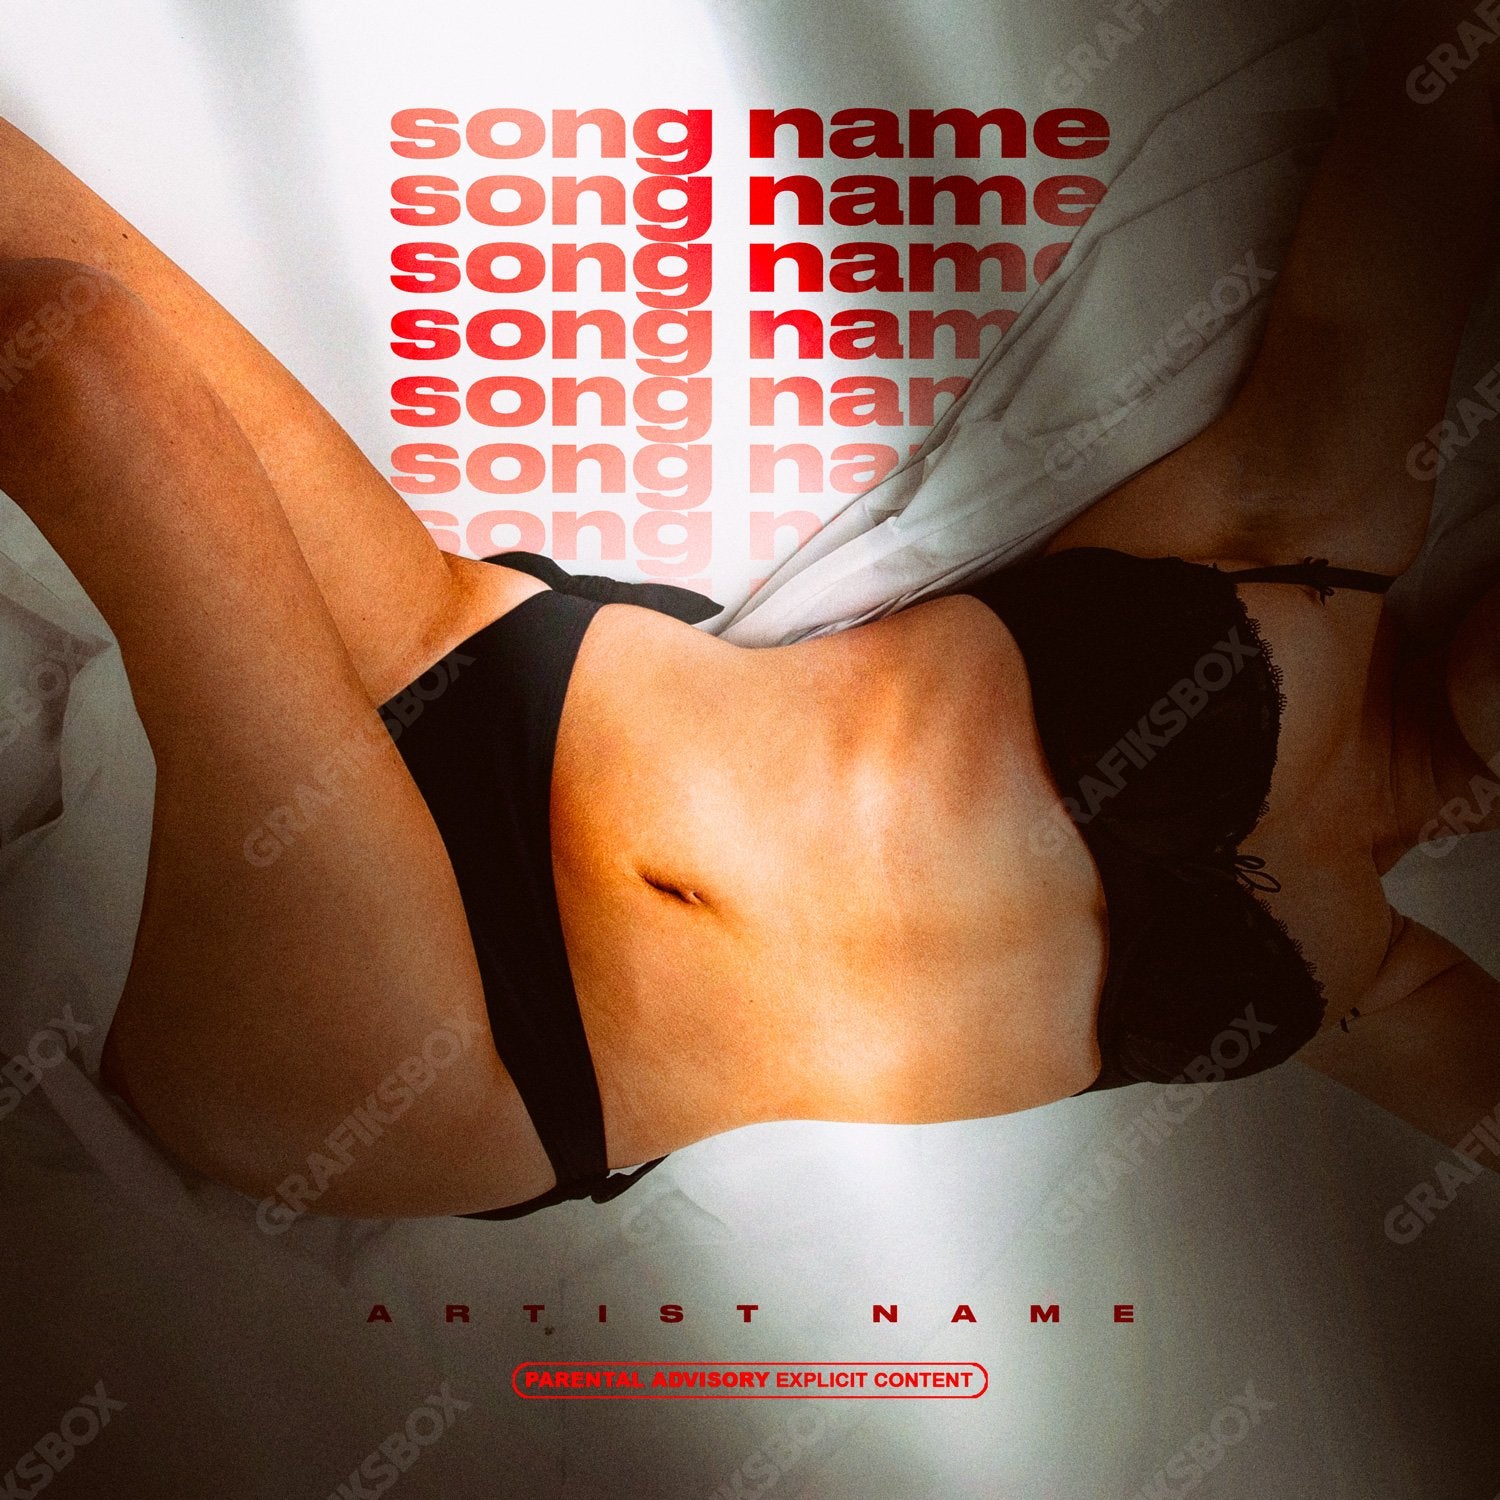 In Bed premade cover art